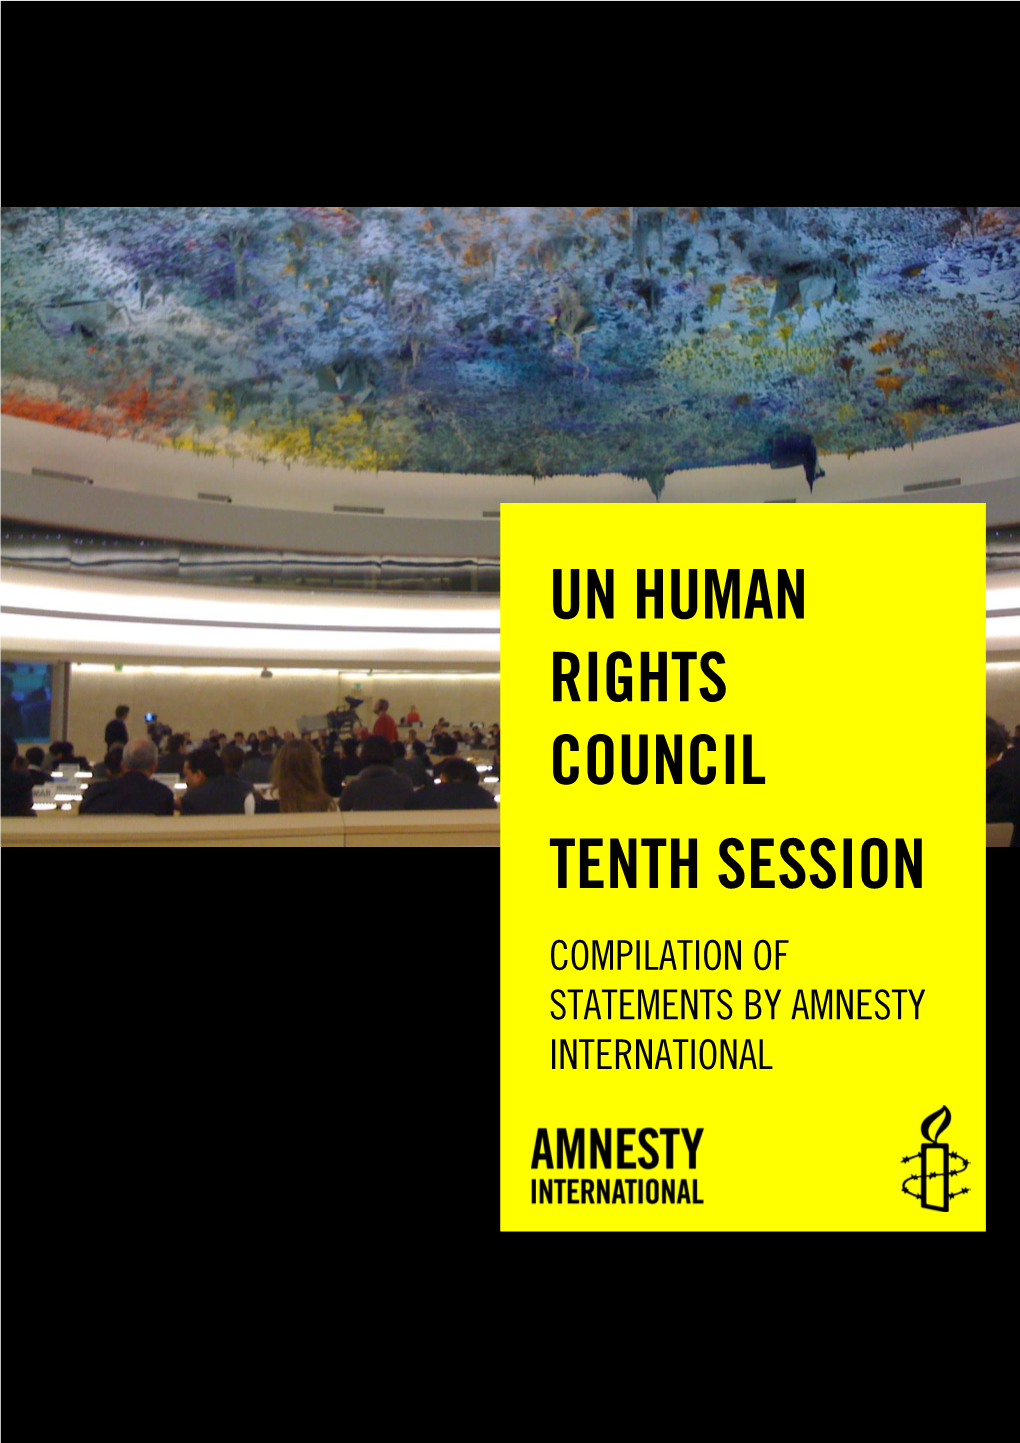 Un Human Rights Council Tenth Session Compilation of Statements by Amnesty International